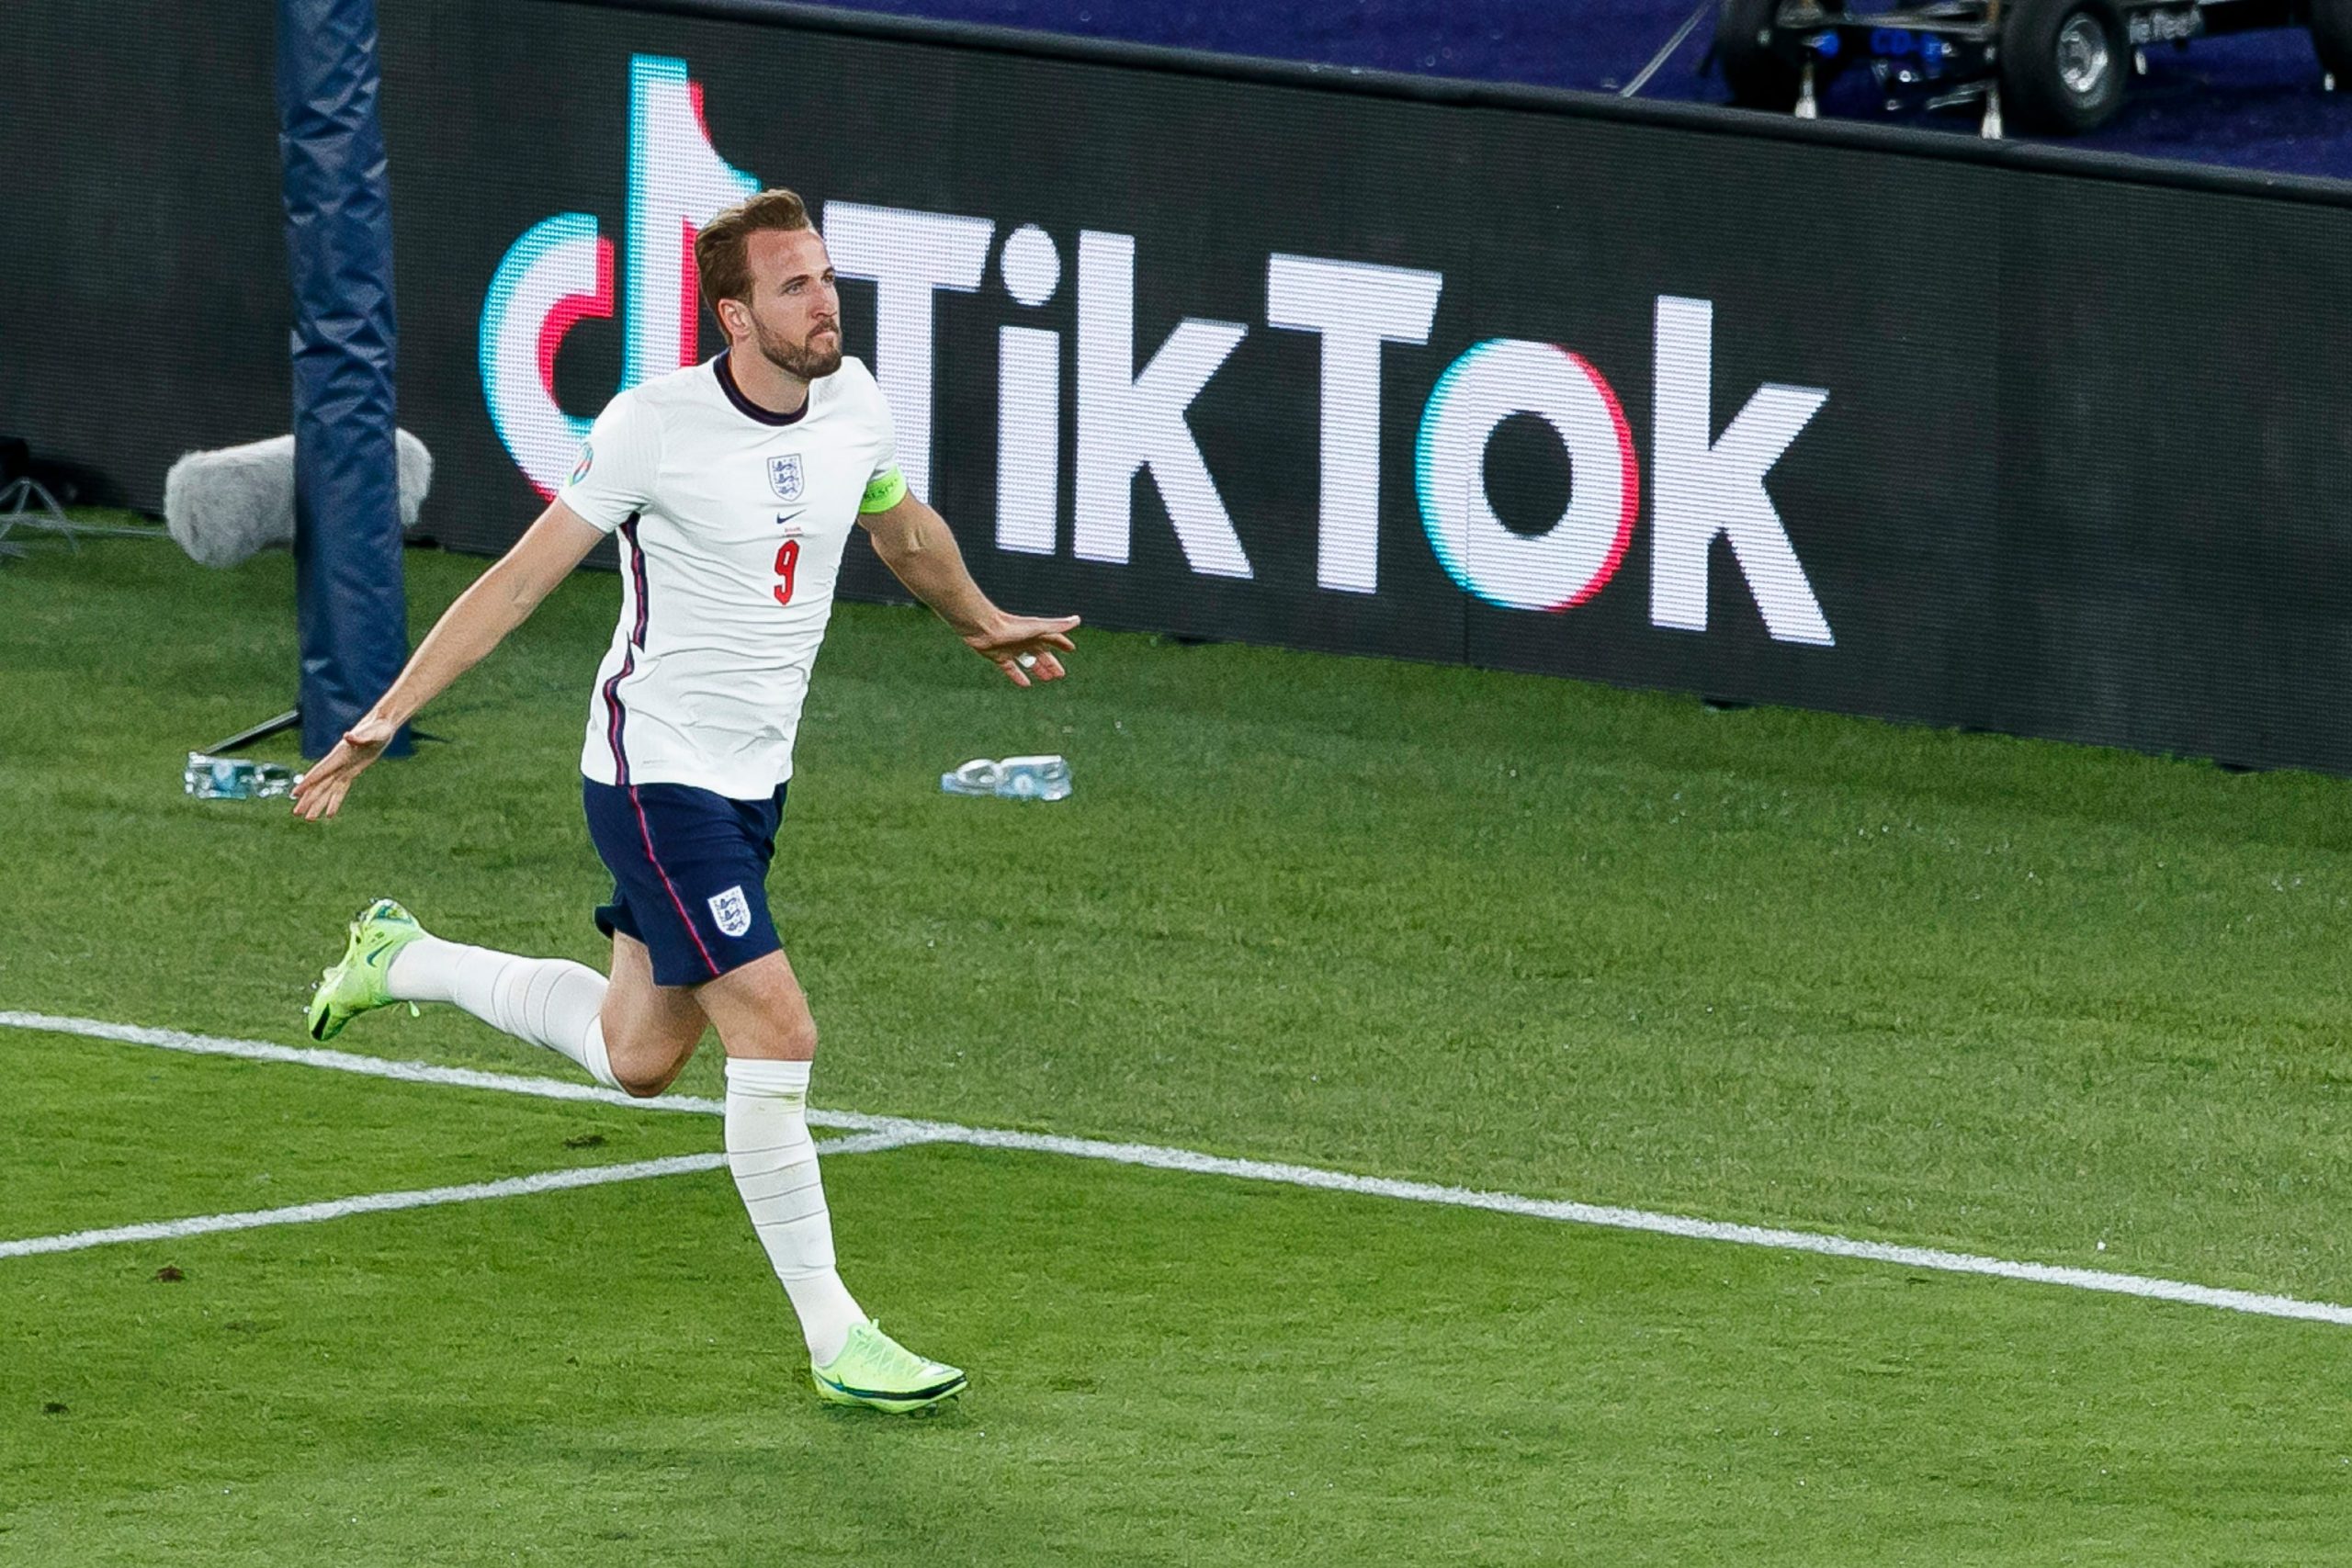 Harry Kane of England celebrates after scoring his team's third goal during the UEFA Euro 2020 Championship Quarter-final match between Ukraine and England